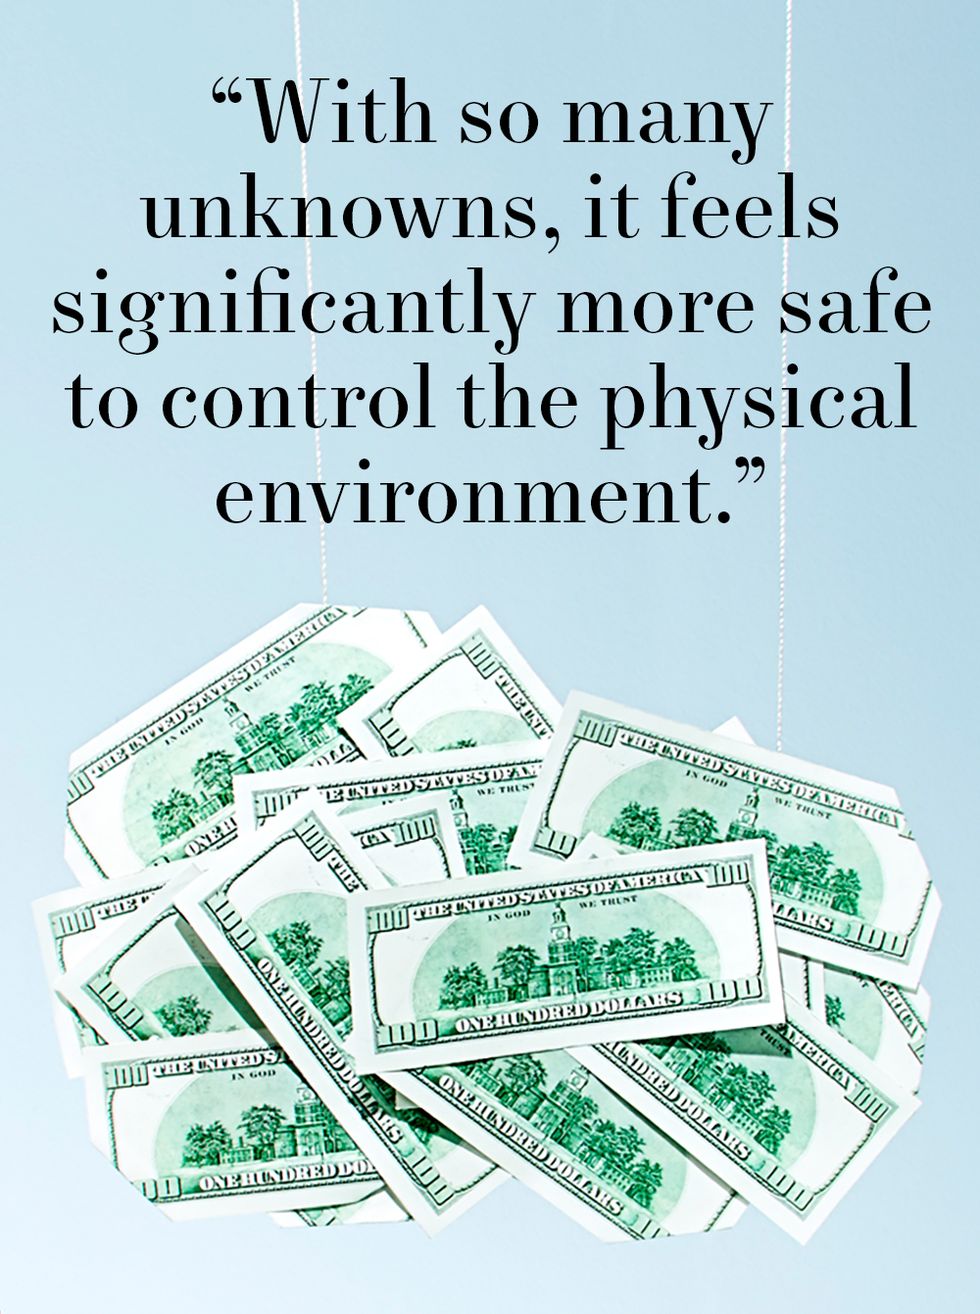 “with so many unknowns, it feels significantly more safe to control the physical environment”